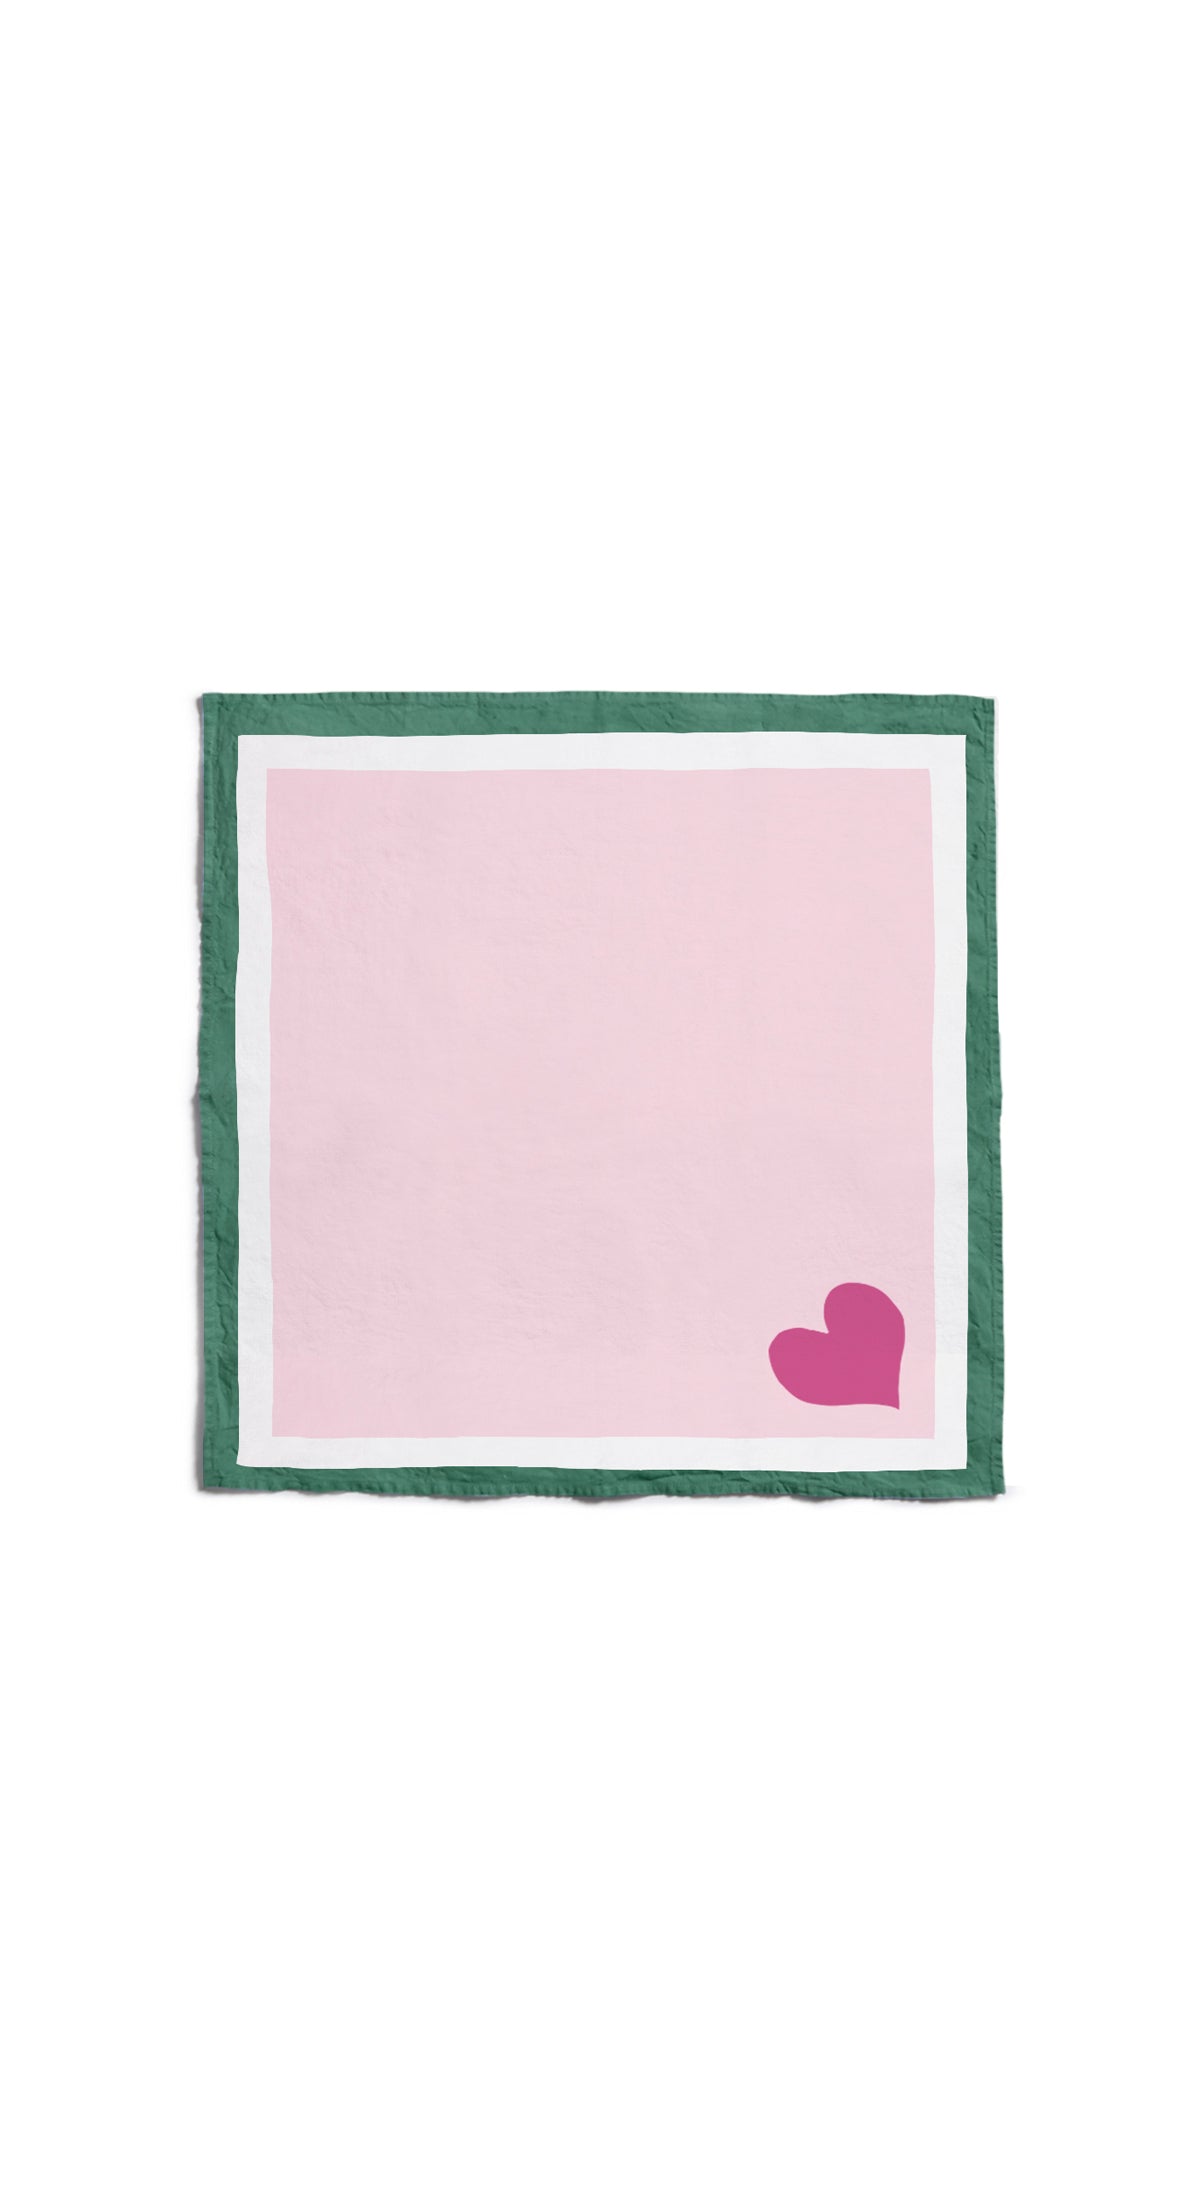 Summerill & Bishop x Lisou Heart Linen Napkin in Petal Pink and Forest Green, 50x50cm